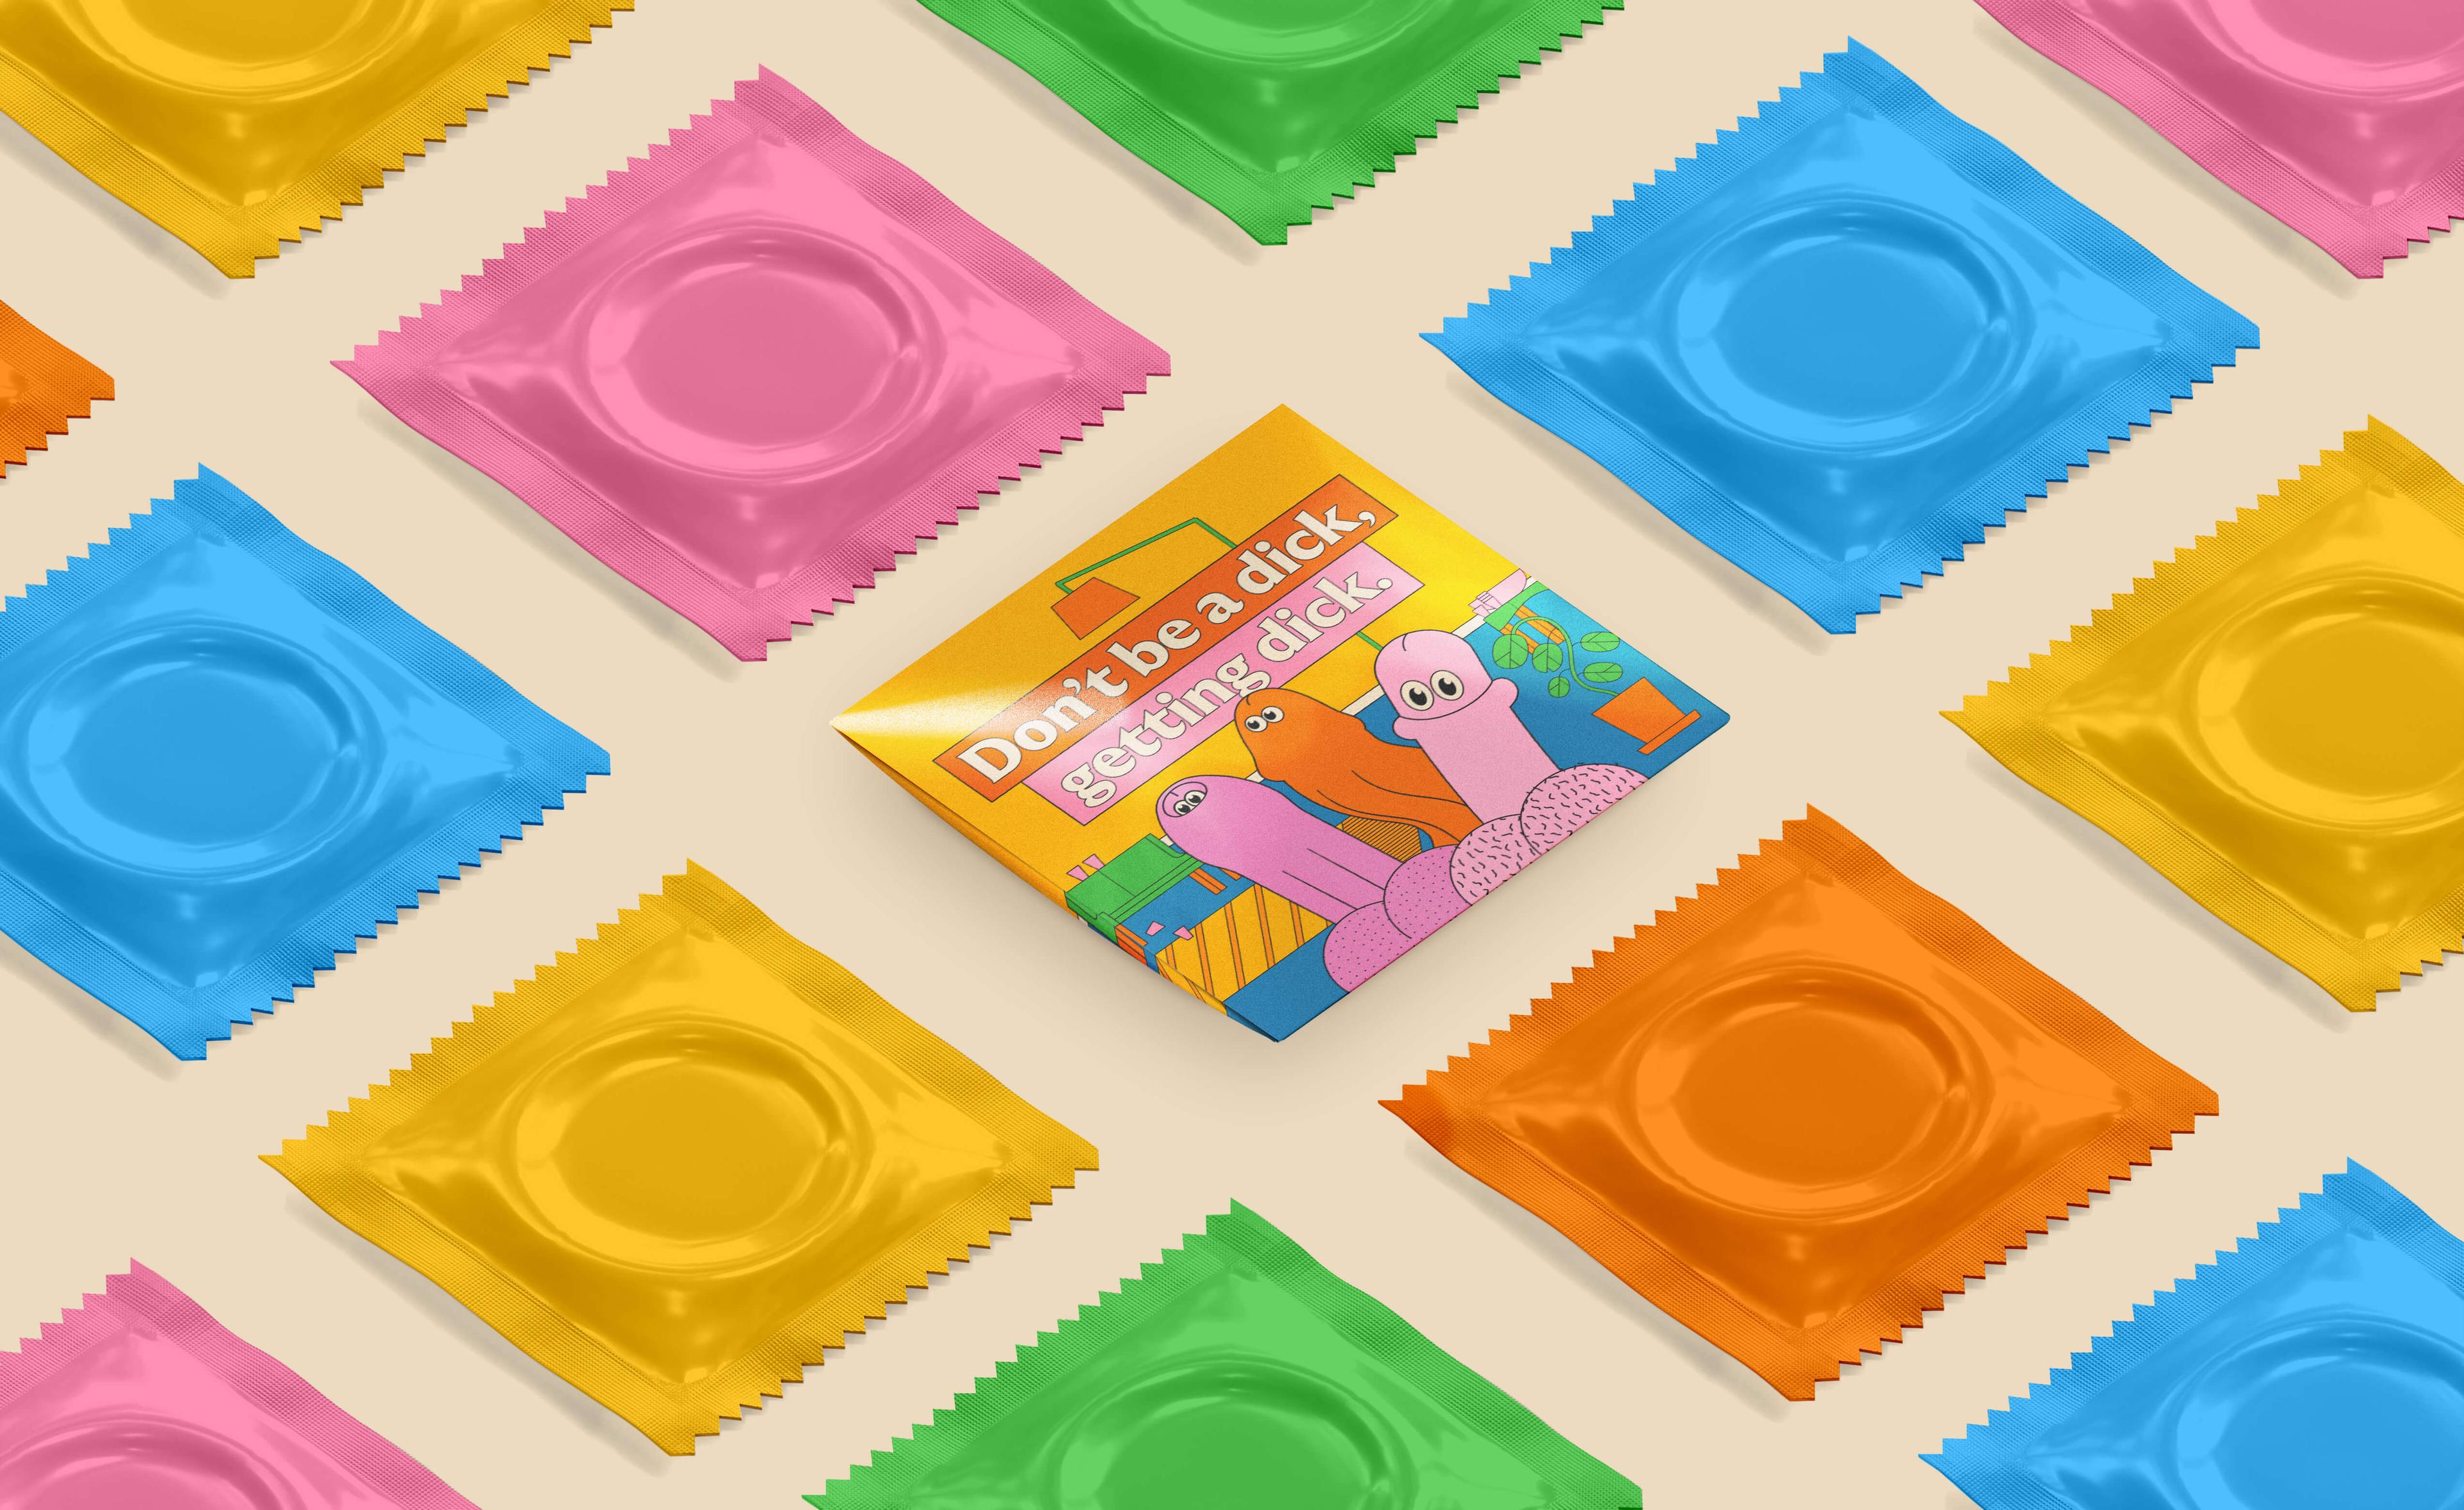 Campaign Branded Box of condoms repeating as a pattern